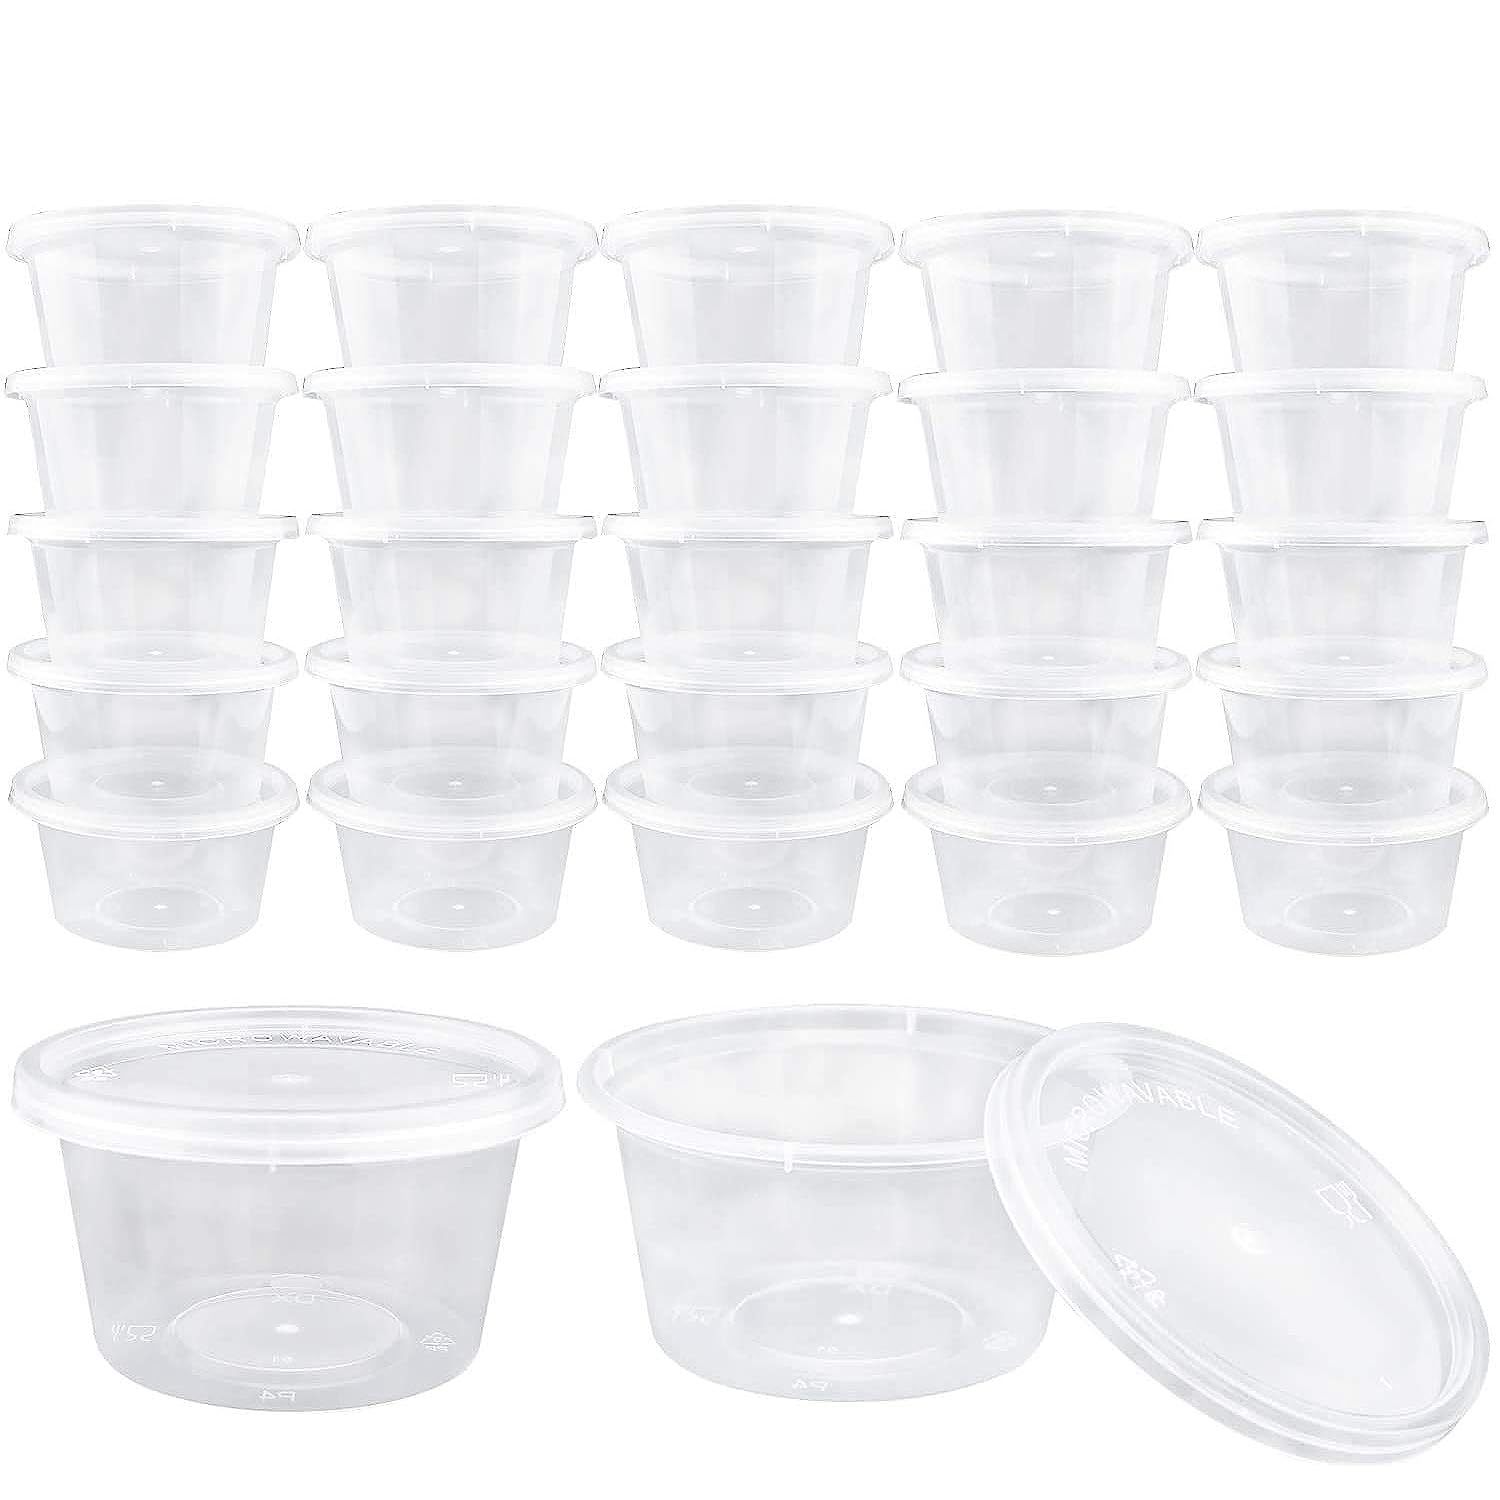 Slime Containers with Lids 40 Pack Small Plastic Containers with Lids for Slime